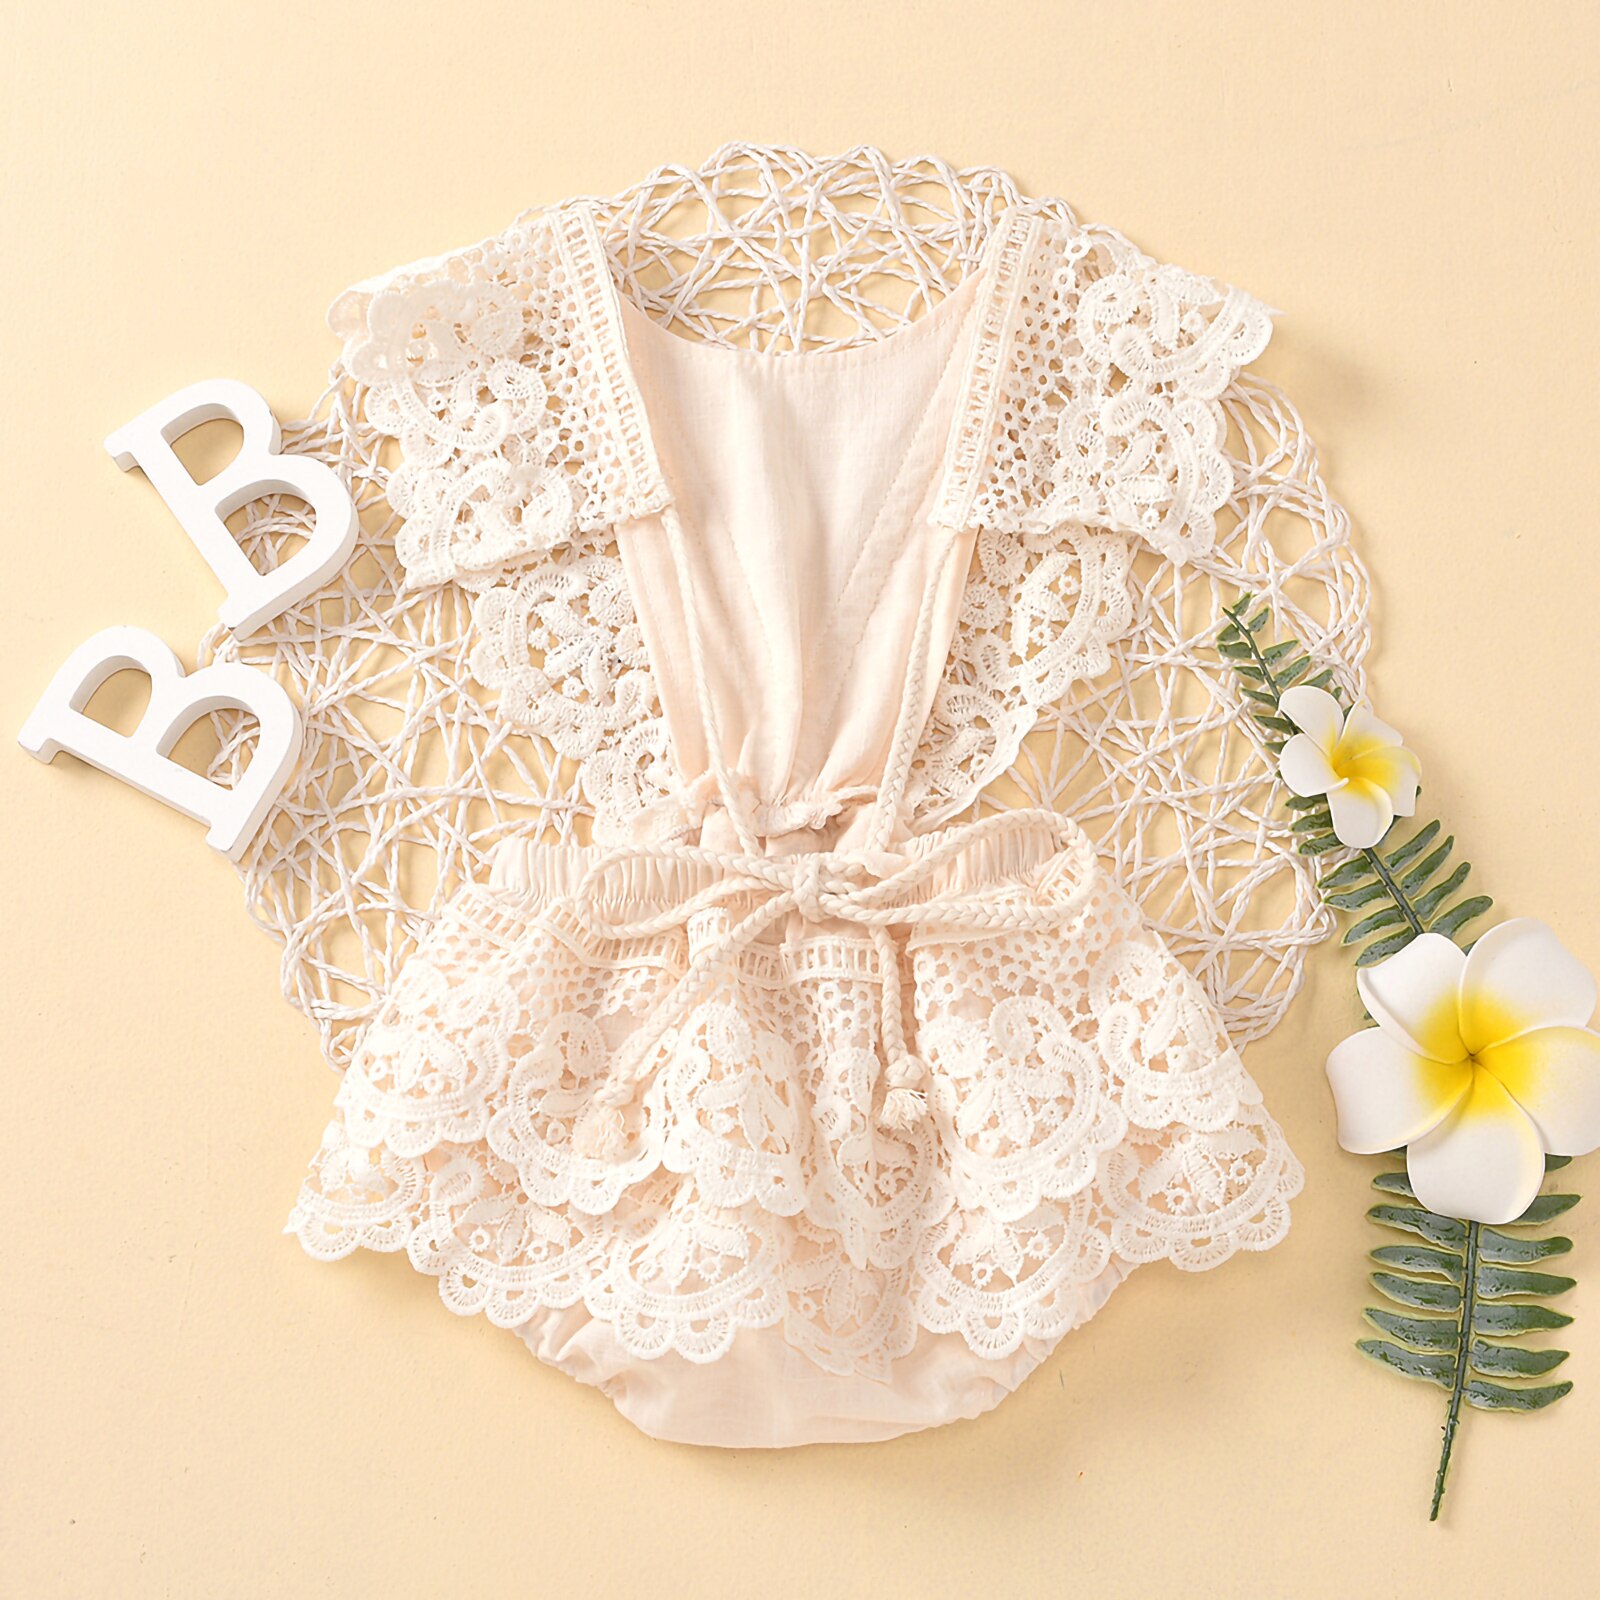 ma-baby-0-24M-Infant-Newborn-Baby-Girl-Romper-Lace-Ruffle-Jumpsuit-Princess-Birthday-Party-Clothing-1